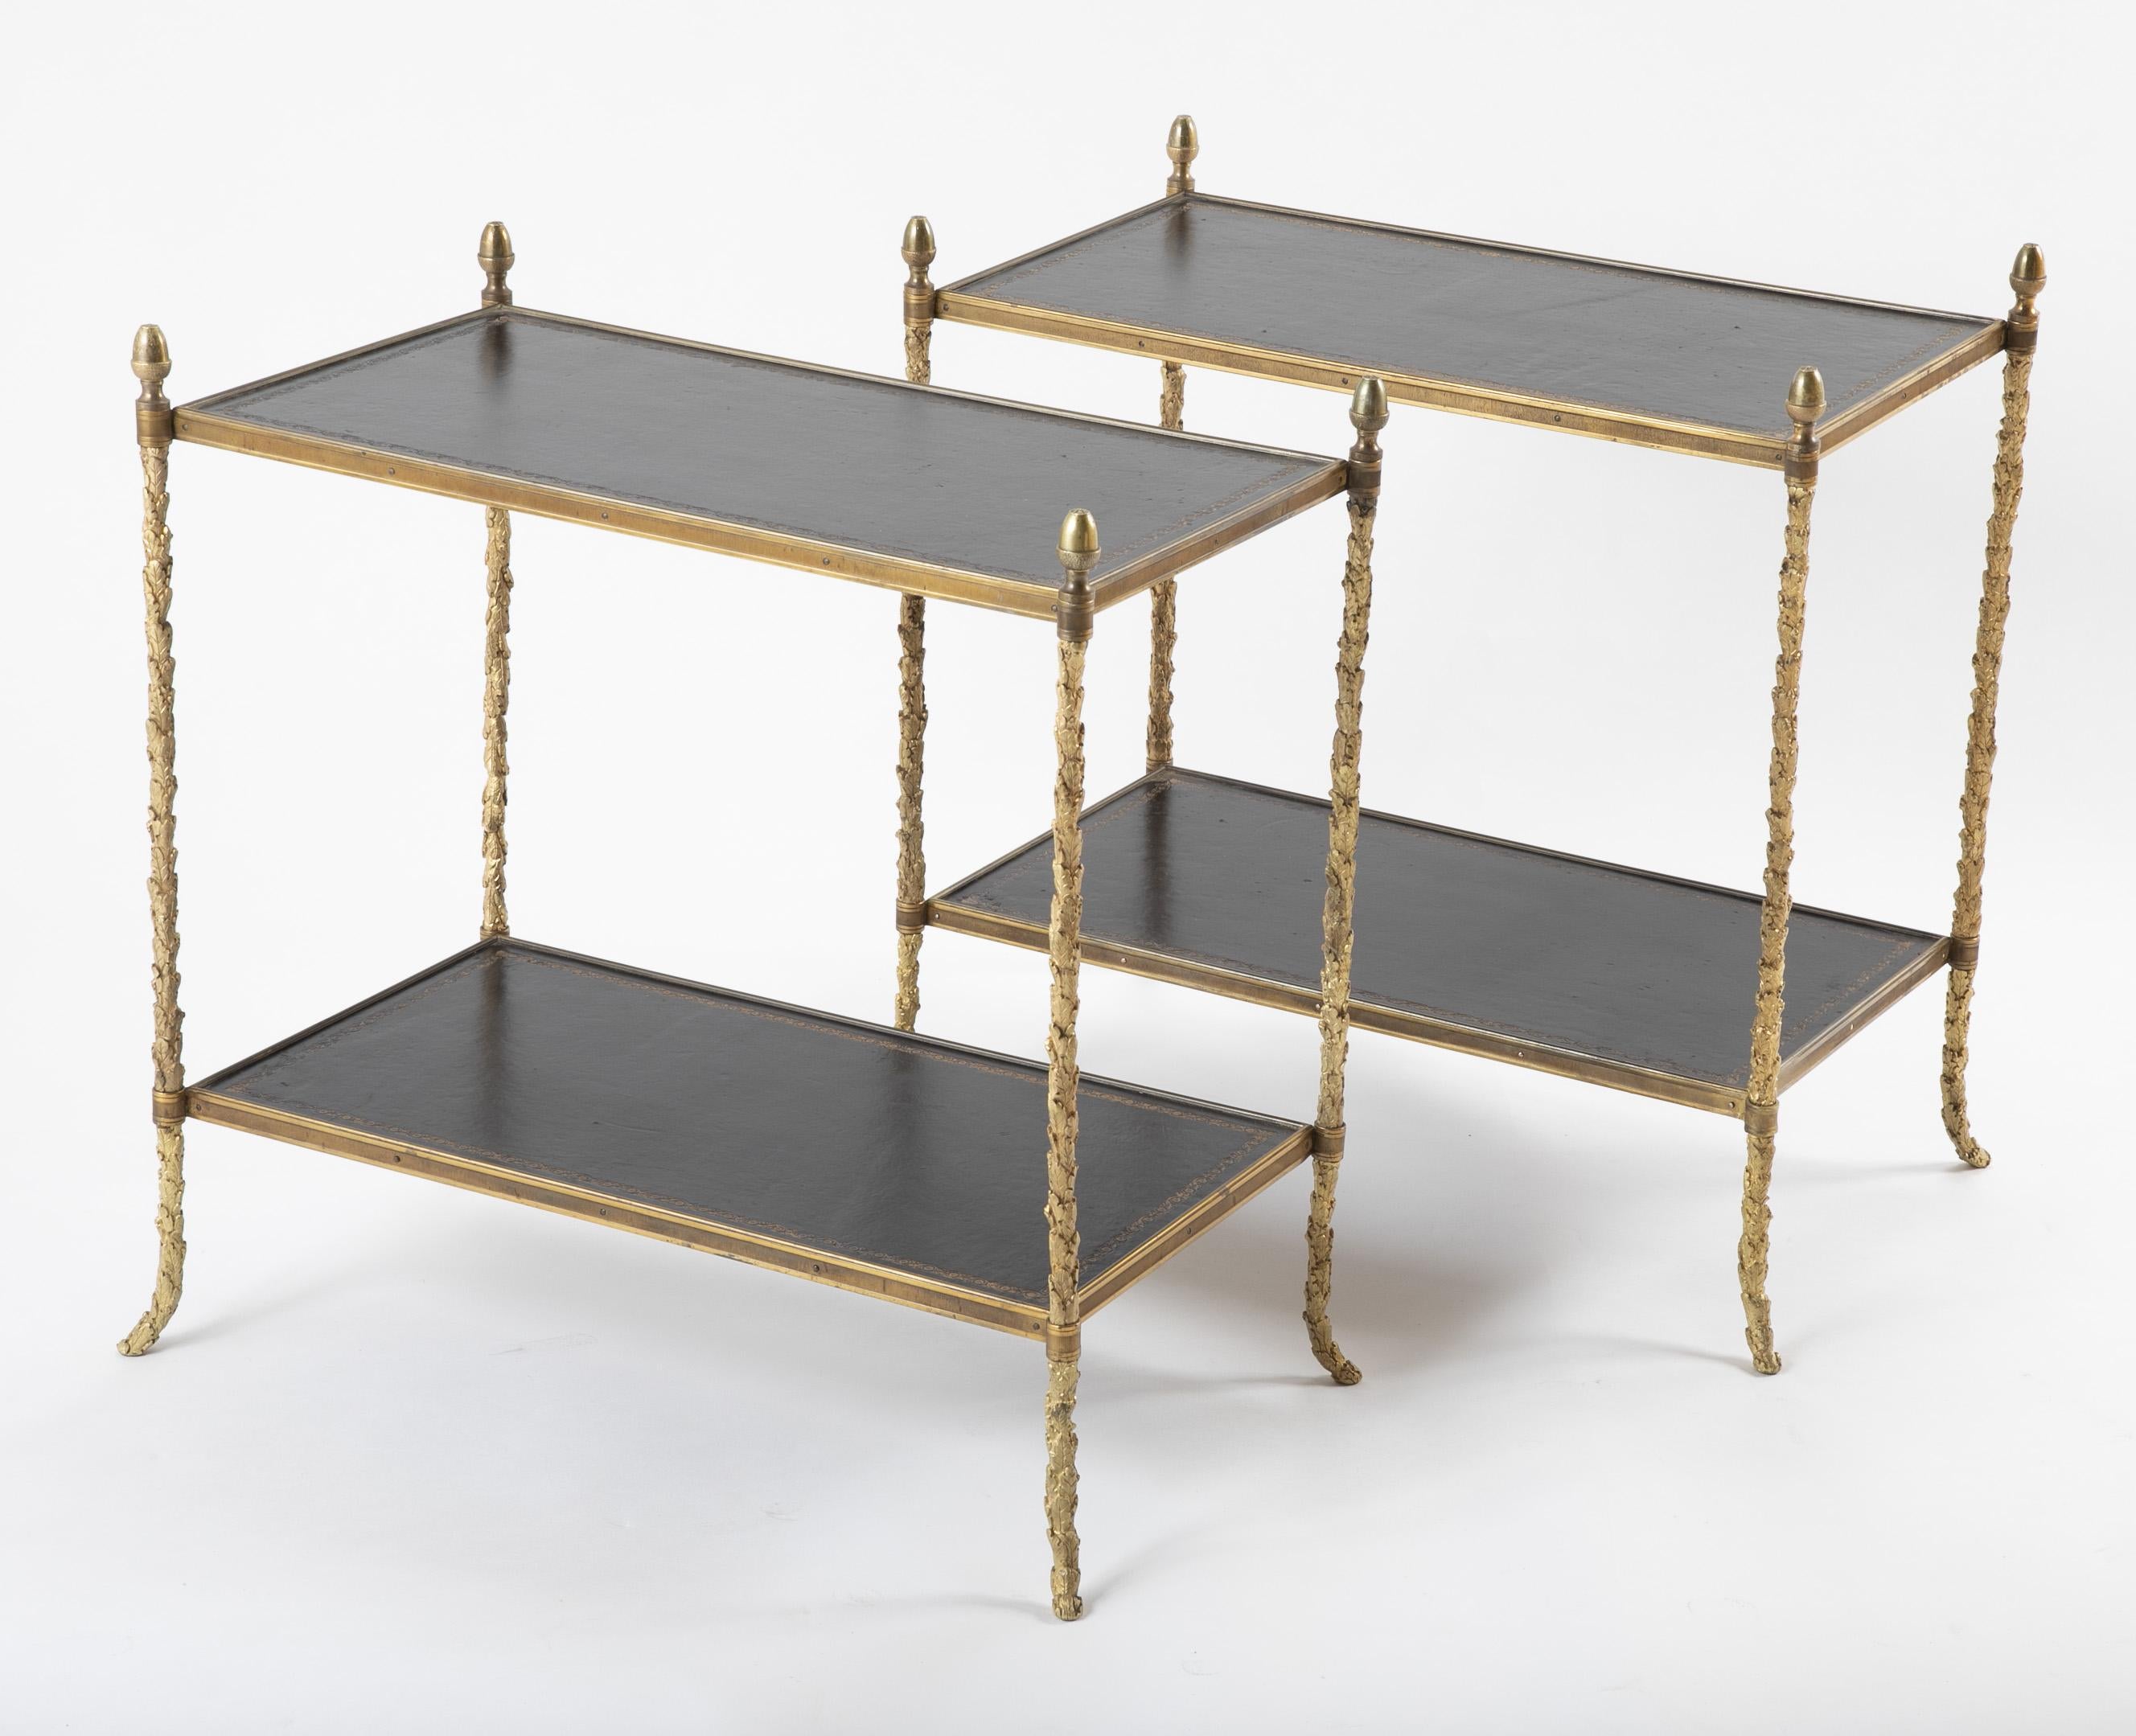 A pair of 1950s gilt bronze side tables with tooled leather tops and shelves.